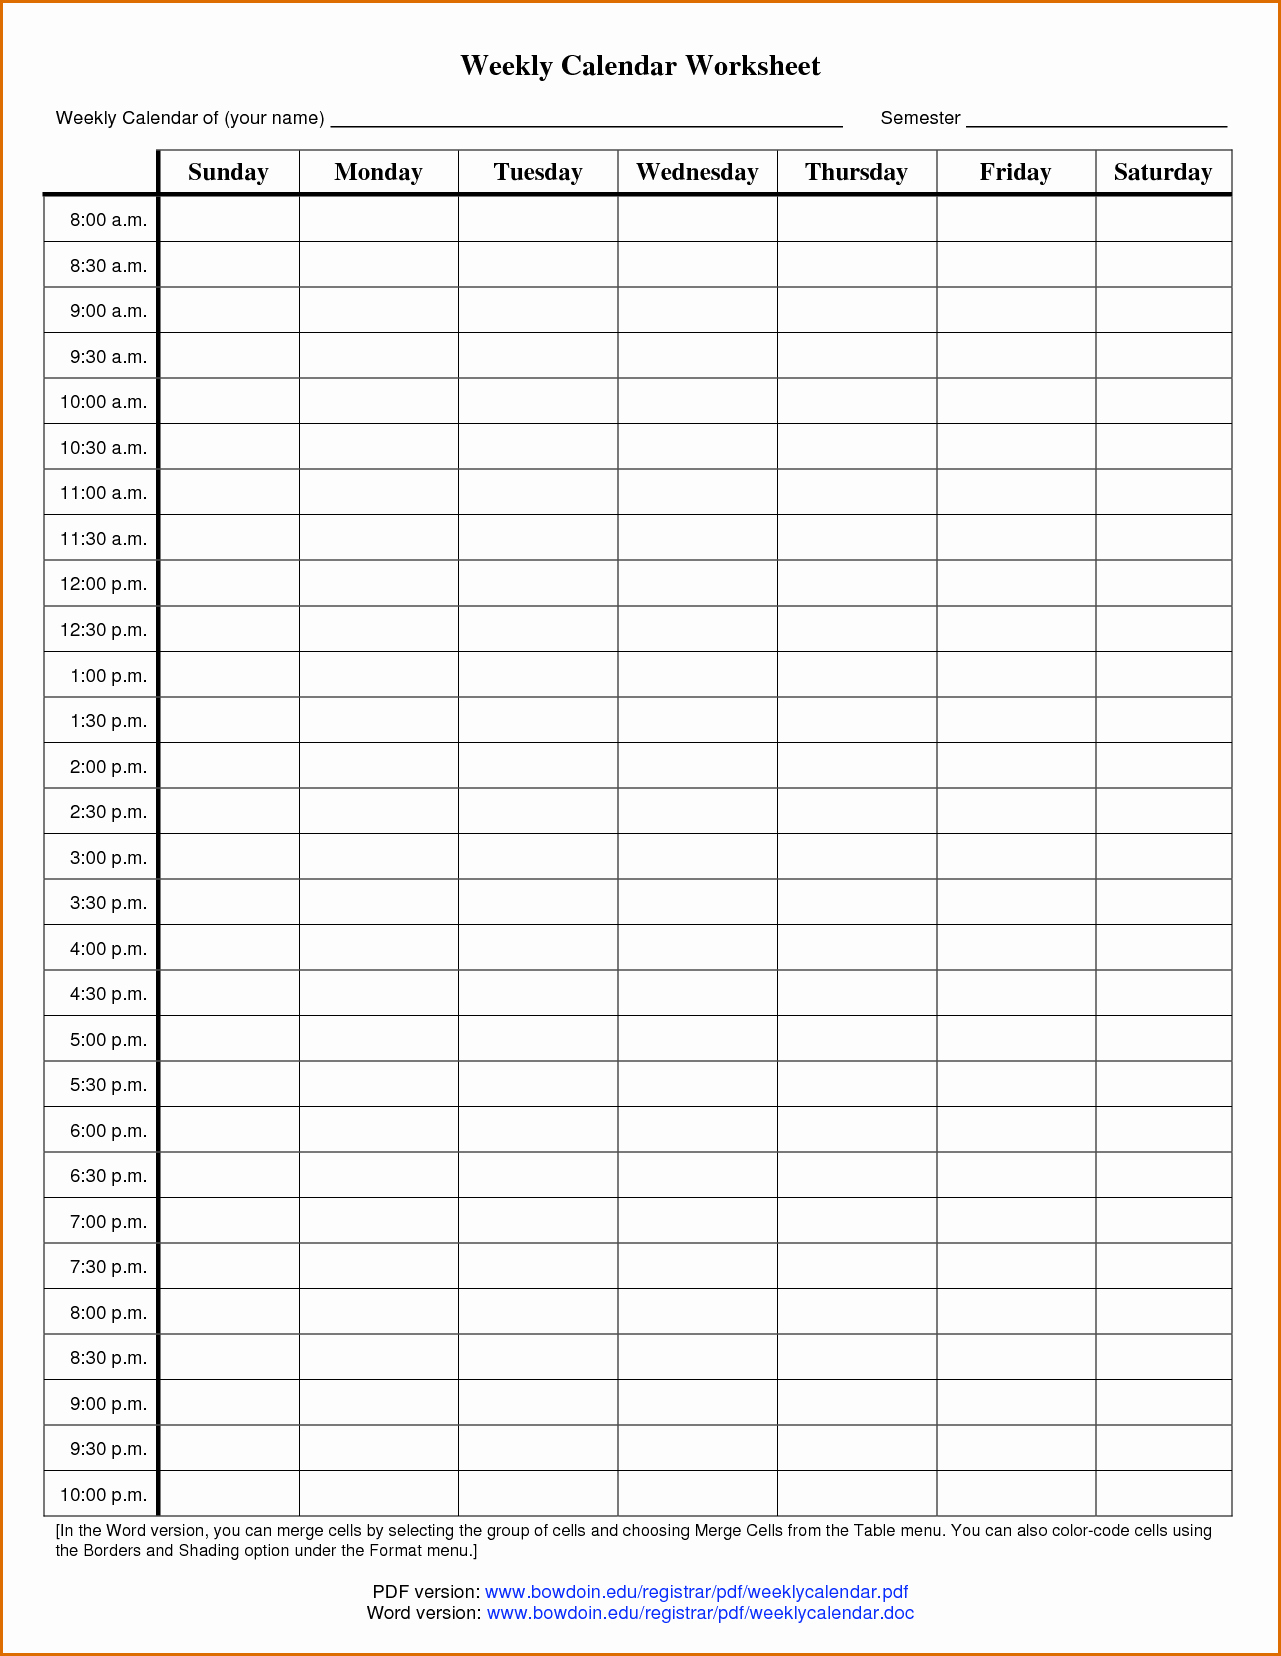 Weekly Schedule Template Pdf New 11 Printable Weekly Calendar with Hours